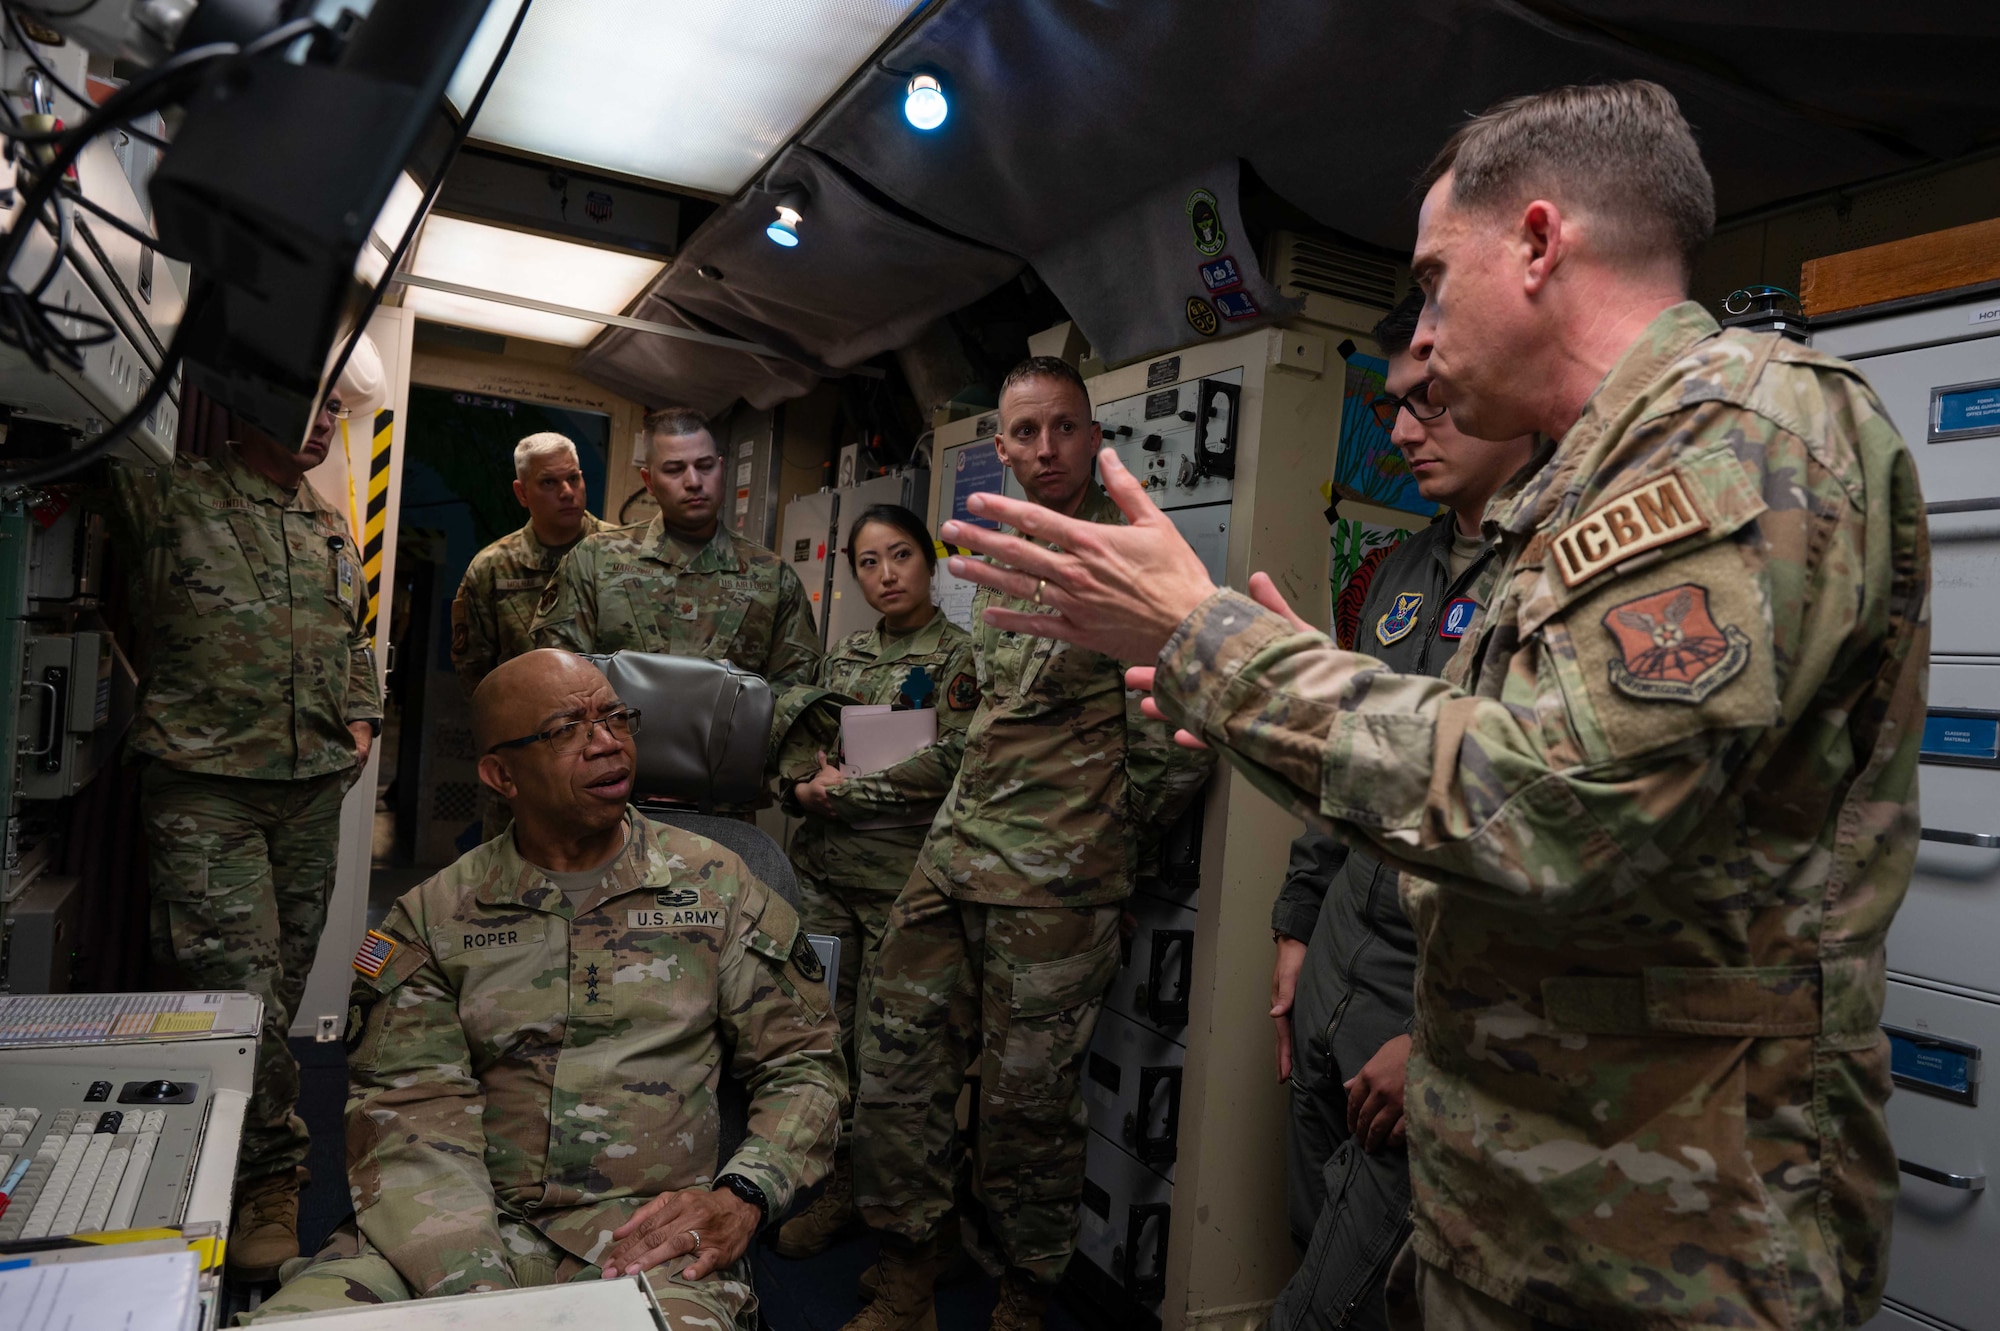 U.S. Air Force Lt. Col. Jared Bishop, 319th Missile Squadron commander, briefs U.S. Army Lt. Gen. A.C. Roper, deputy commander of U.S. Northern Command, on launch control center operation at the Bravo-01 missile alert facility near Bushnell, Nebraska, June 13, 2023. The 90th Missile Wing provides defense support to civil authorities for emergency response when tasked under USNORTHCOM. (U.S. Air Force photo by Senior Airman Sarah Post)